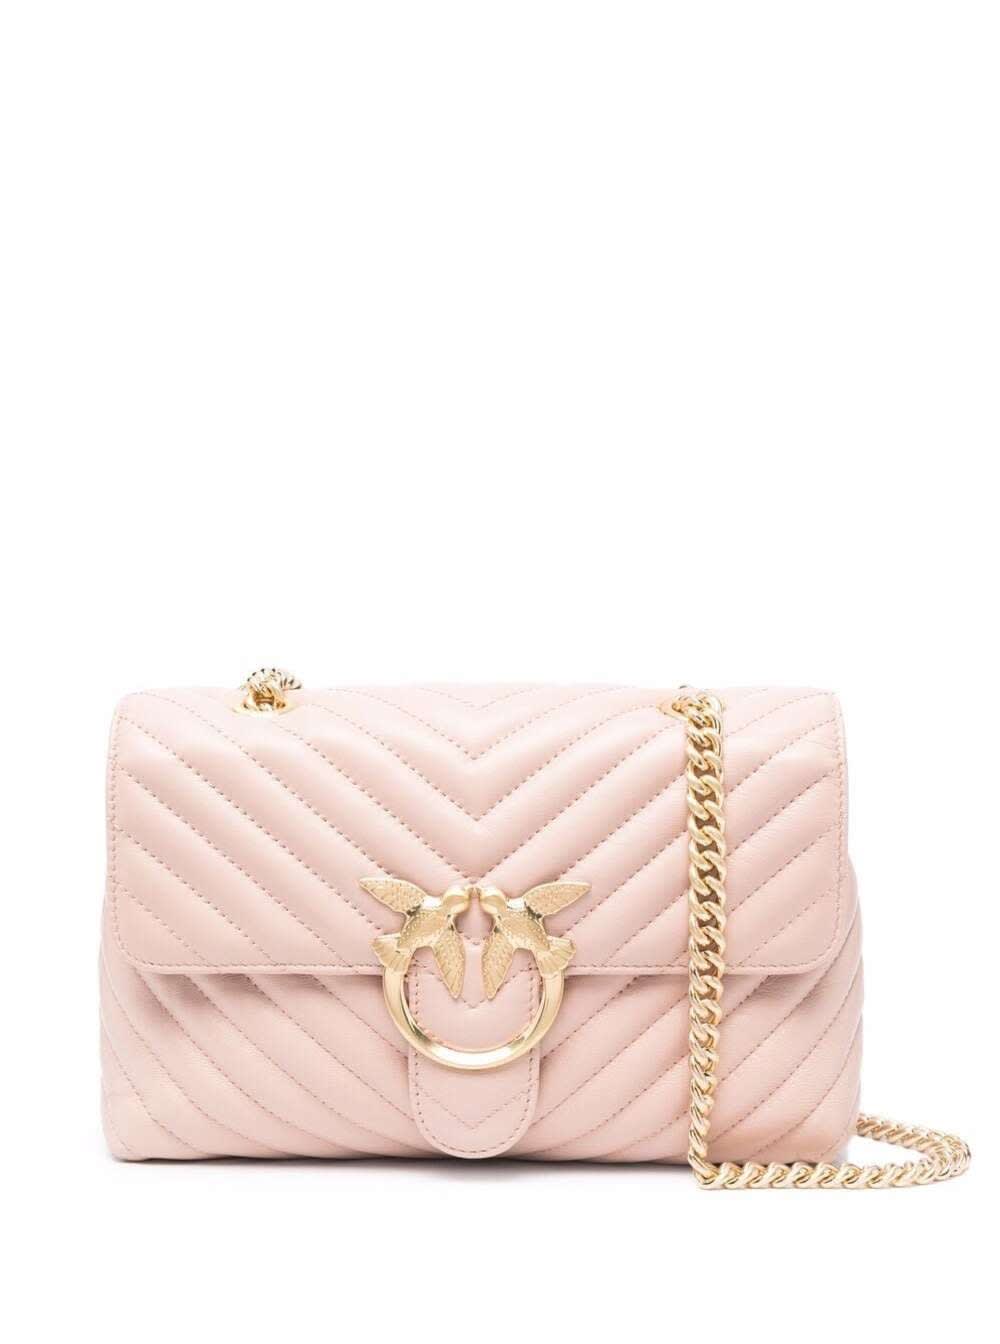 Pinko Love Pink Quilted Leather Crossbody Bag